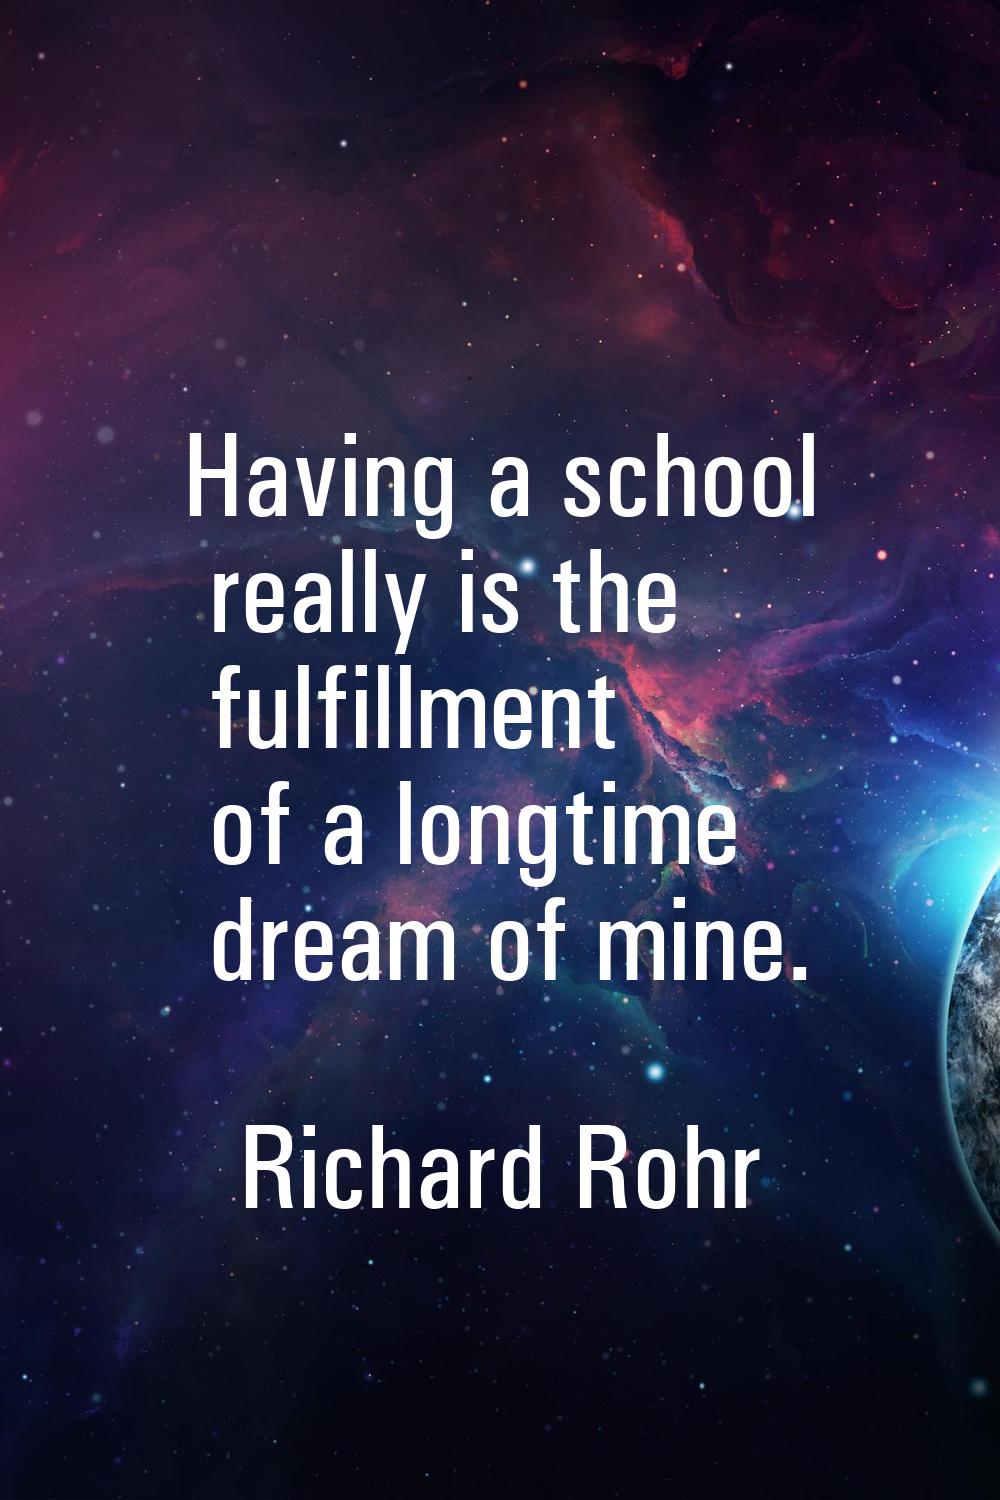 Having a school really is the fulfillment of a longtime dream of mine.